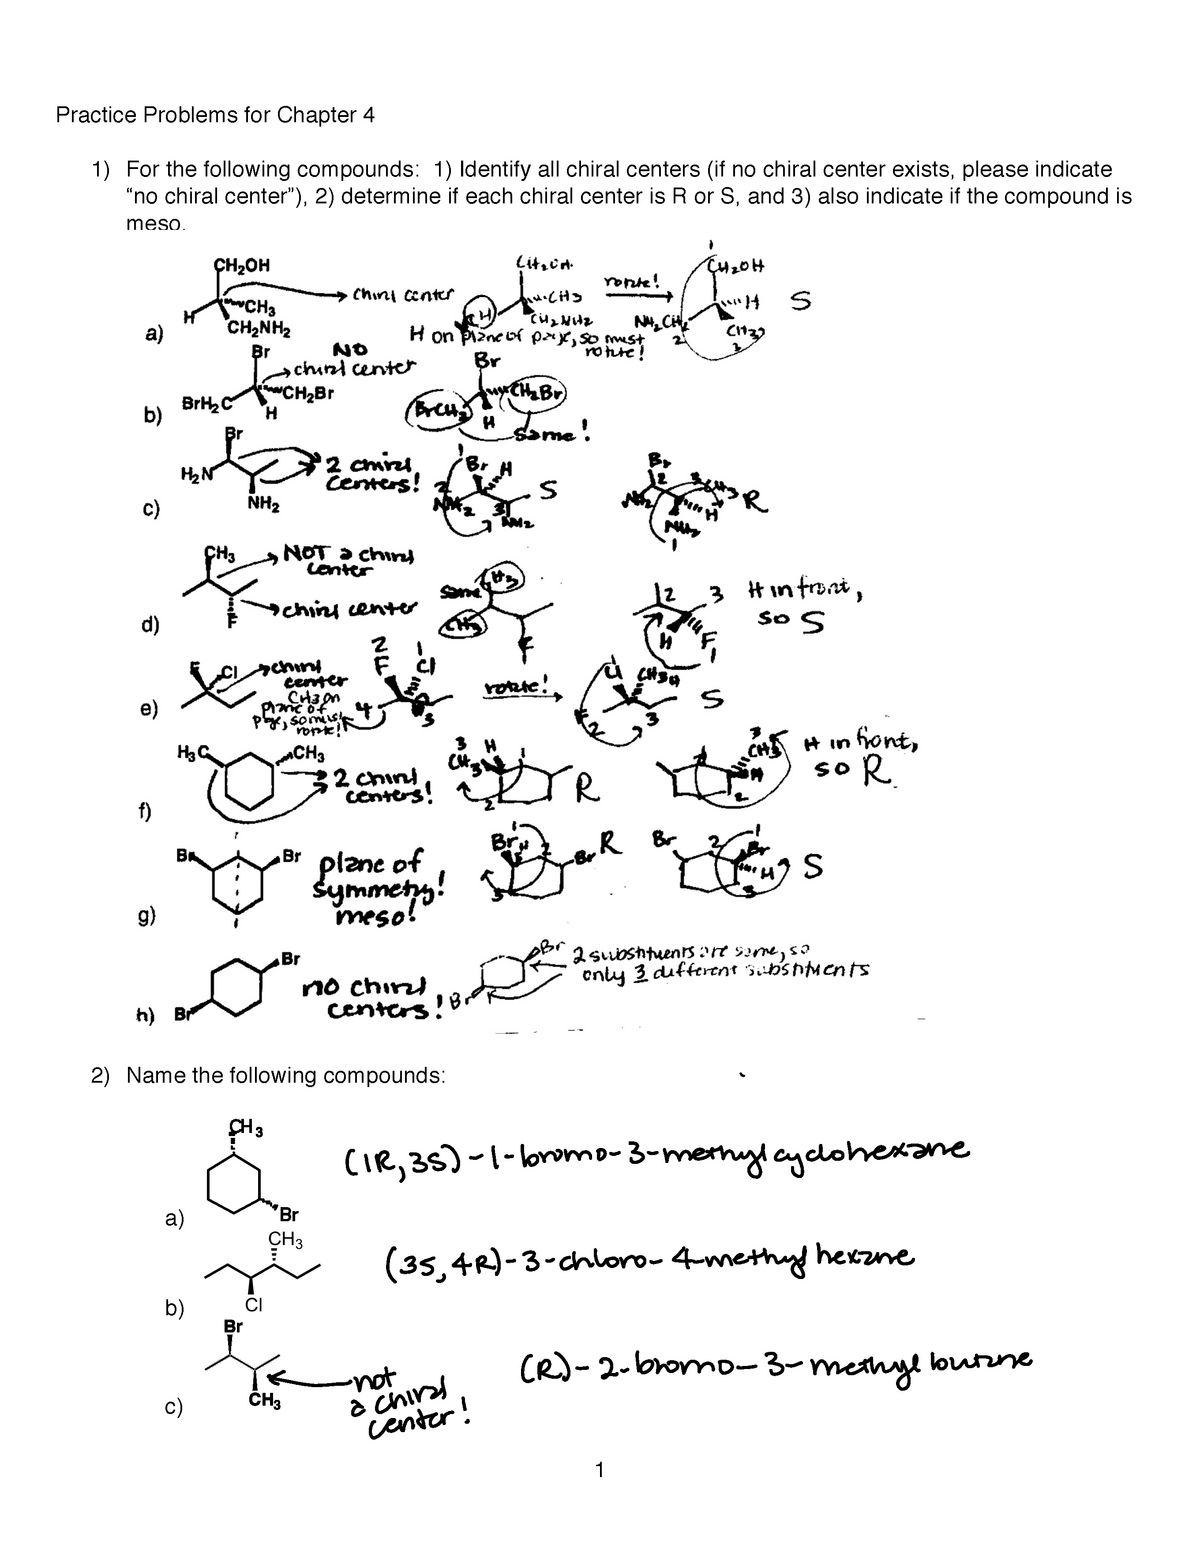 ORGO 25 - lesson practice - Practice Problems for Chapter 4 1) For the ...